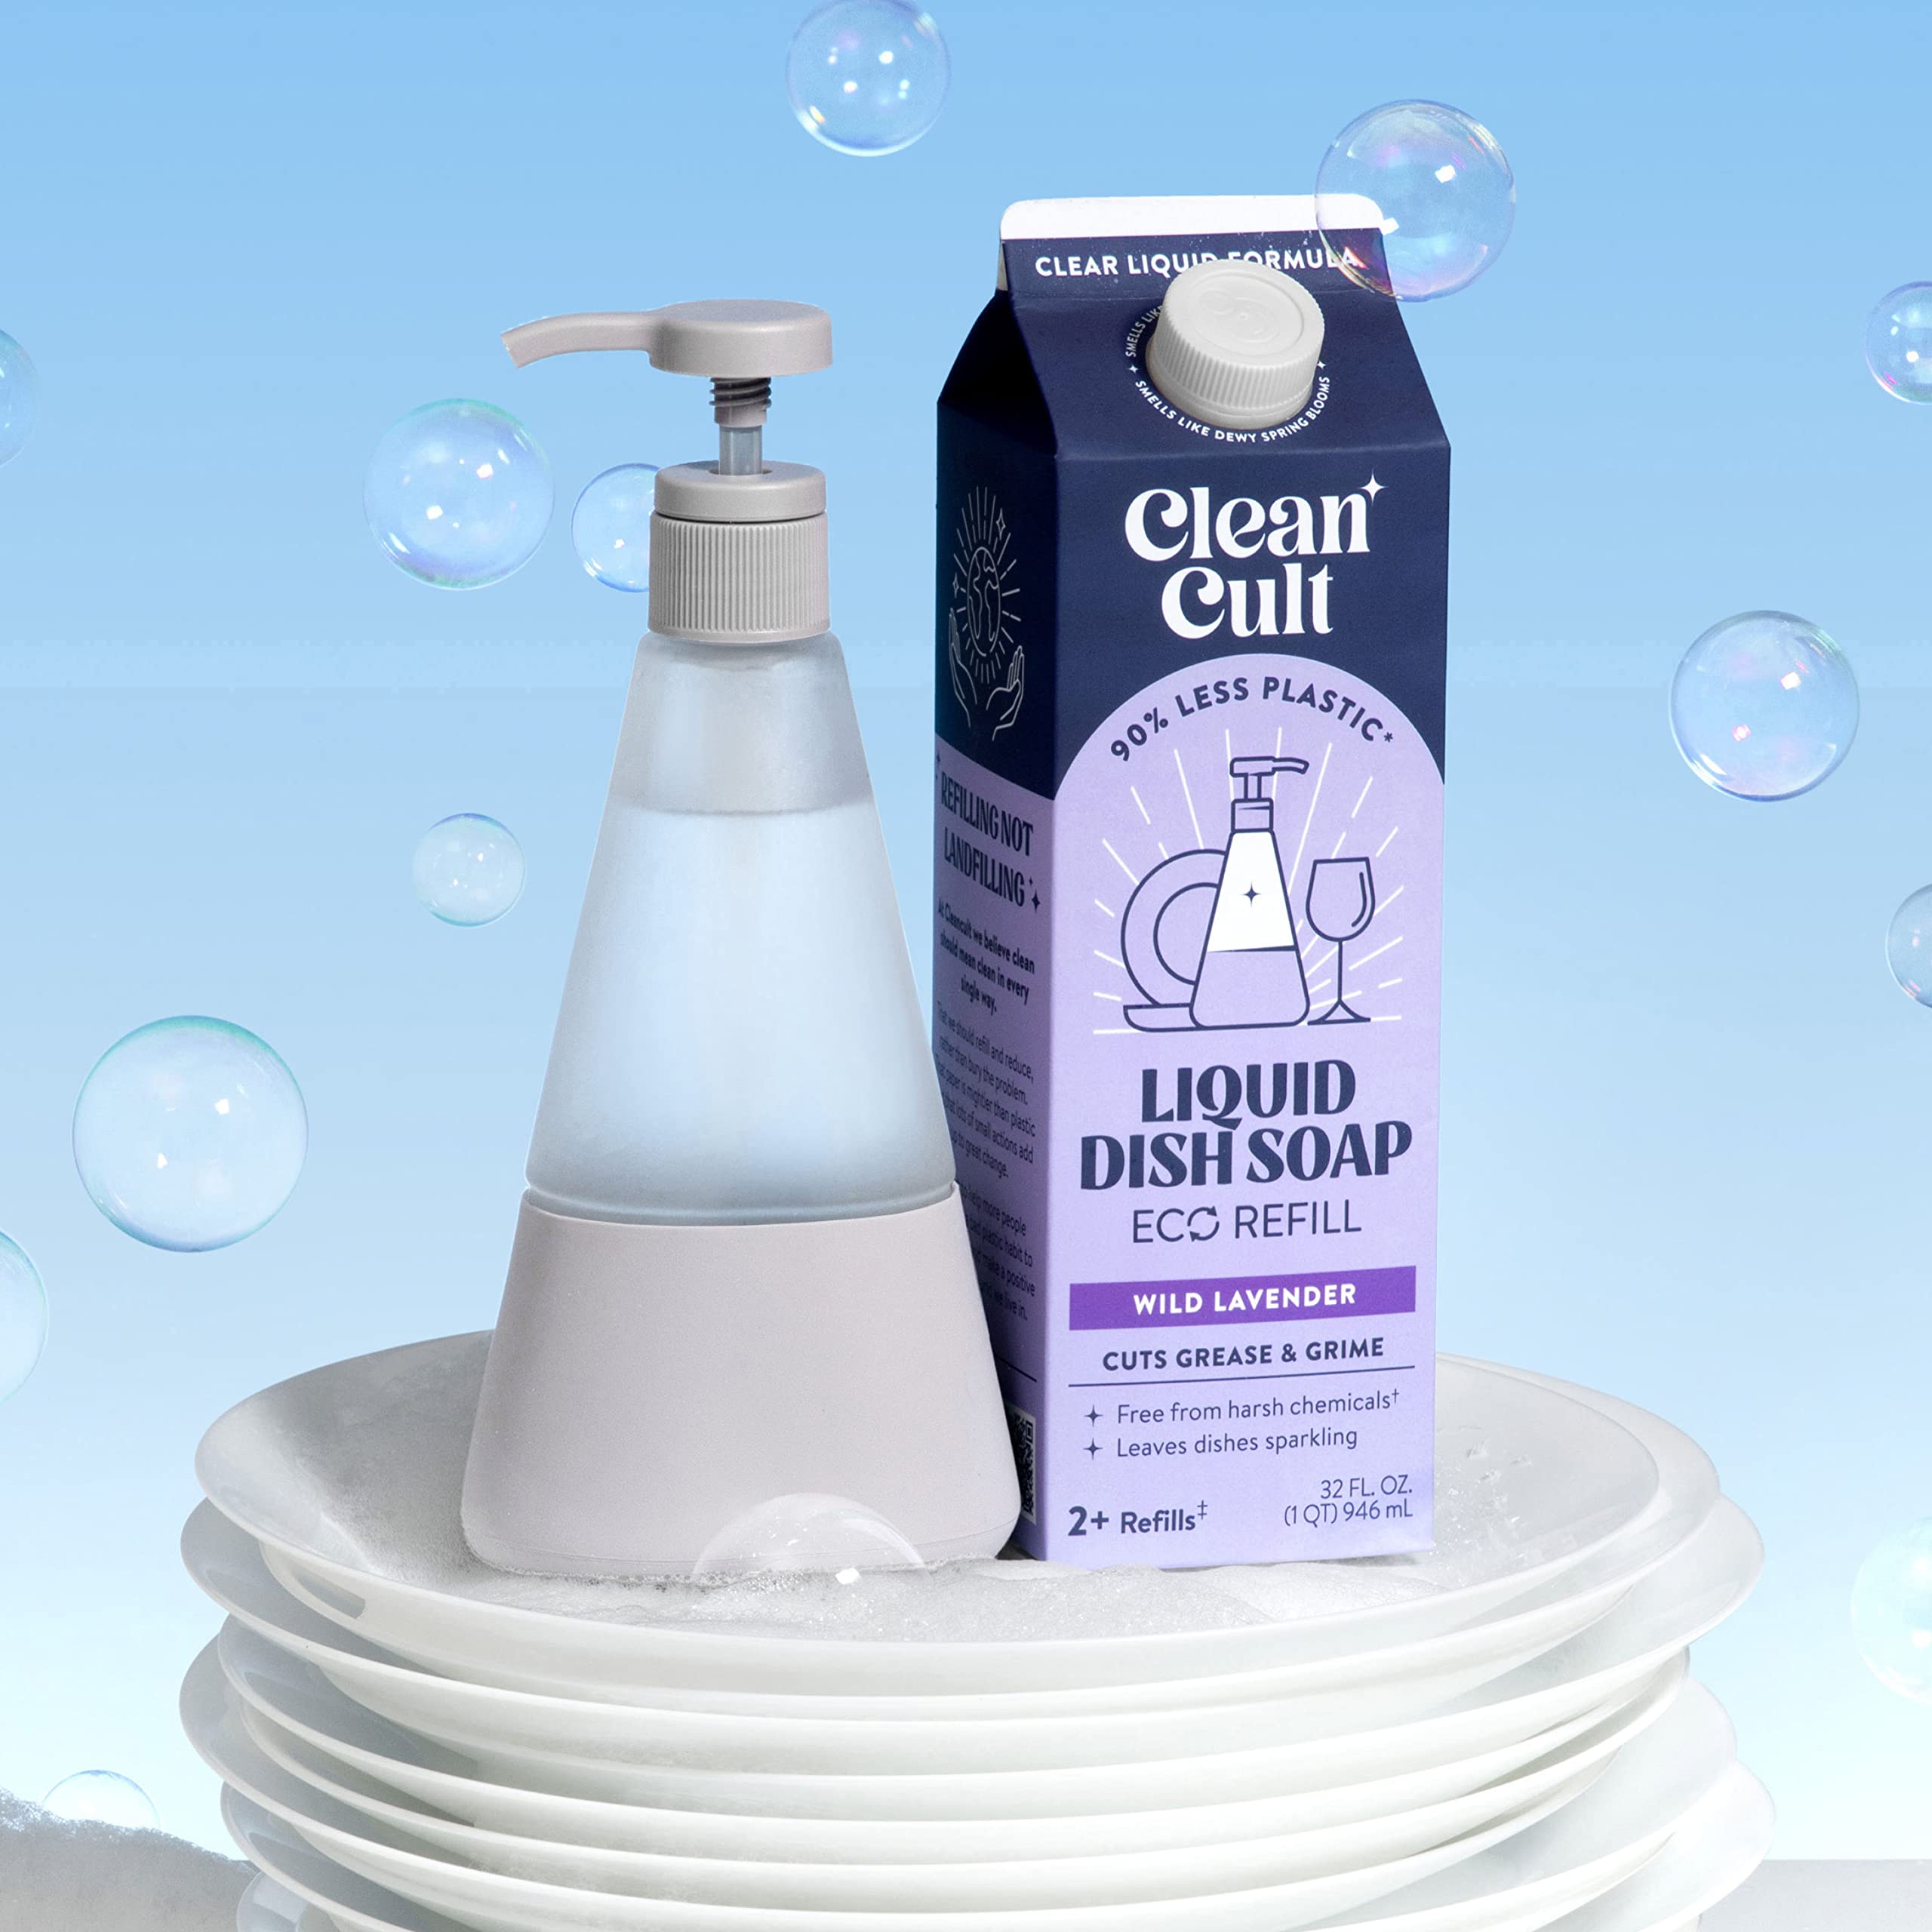 Cleancult Dish Soap Liquid Refills (32oz, 1 Pack) - Dish Soap that Cuts Grease & Grime - Free of Harsh Chemicals - Paper Based Eco Refill, Uses 90% Less Plastic - Wild Lavender